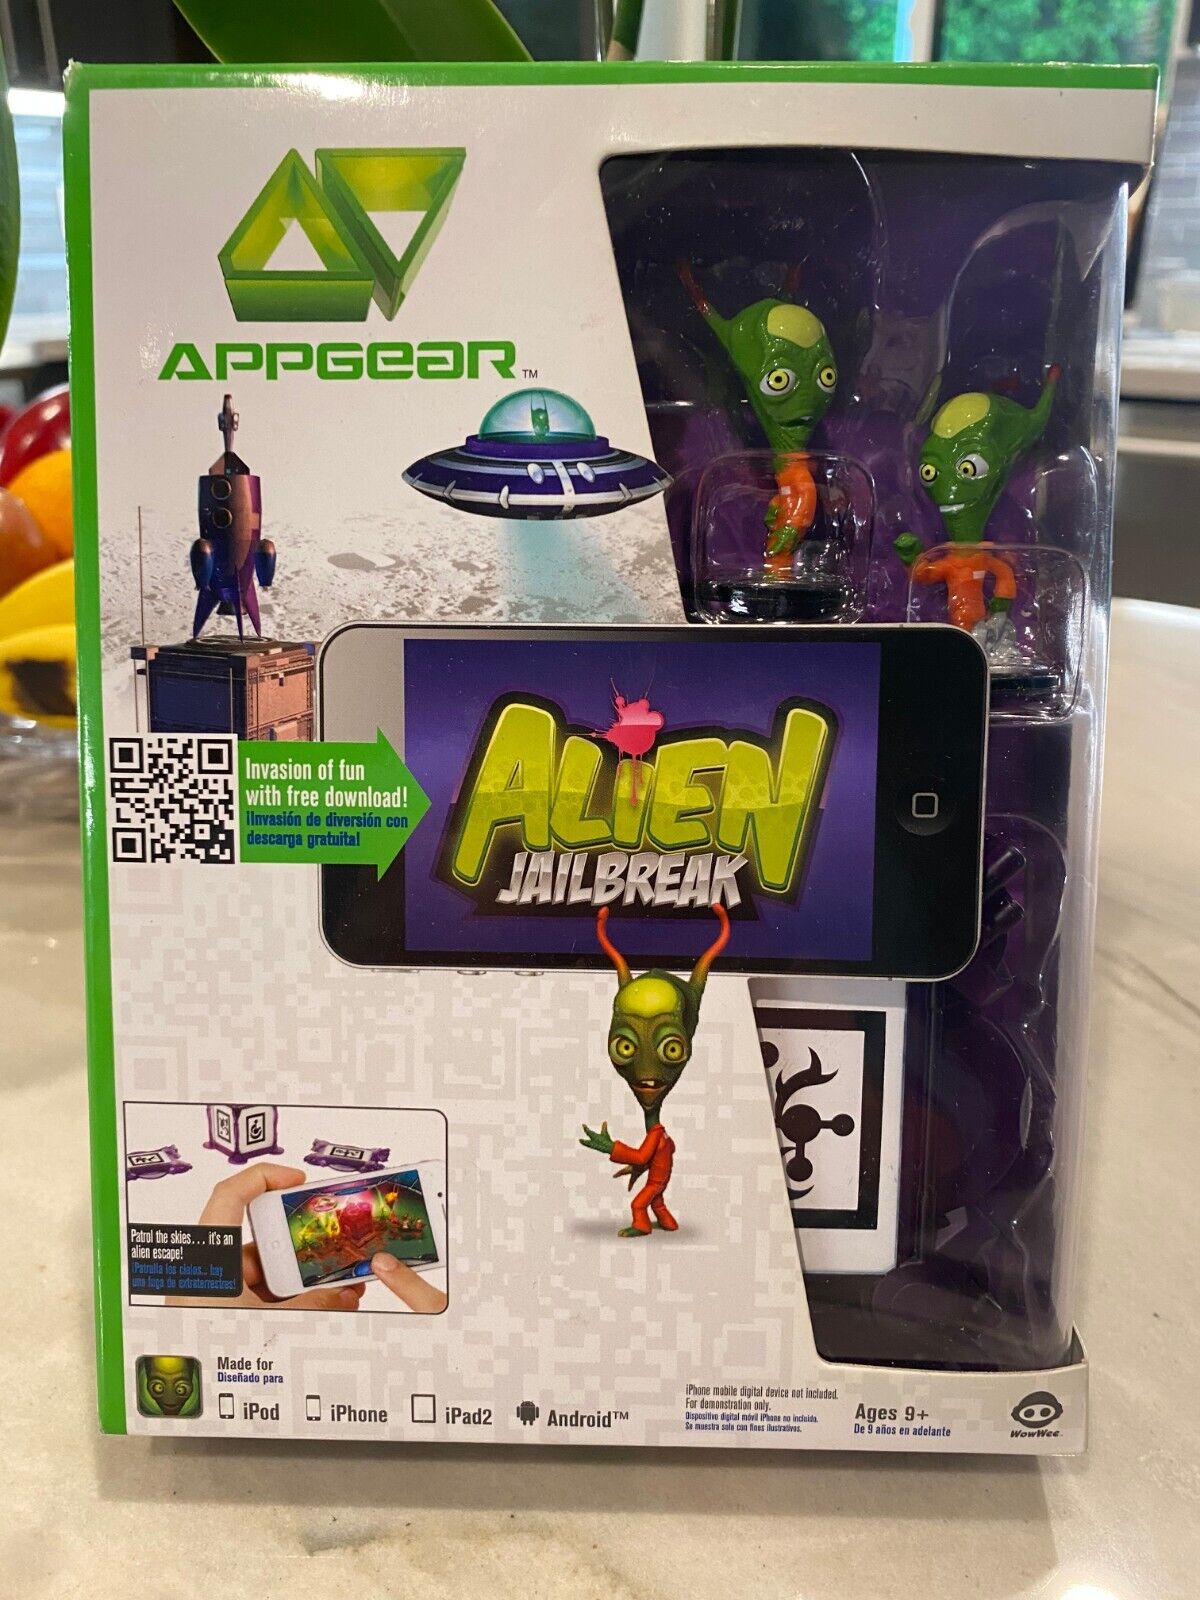 AppGear Alien Jail Break Mobile Application Game for iPod iPhone iPad2 Android